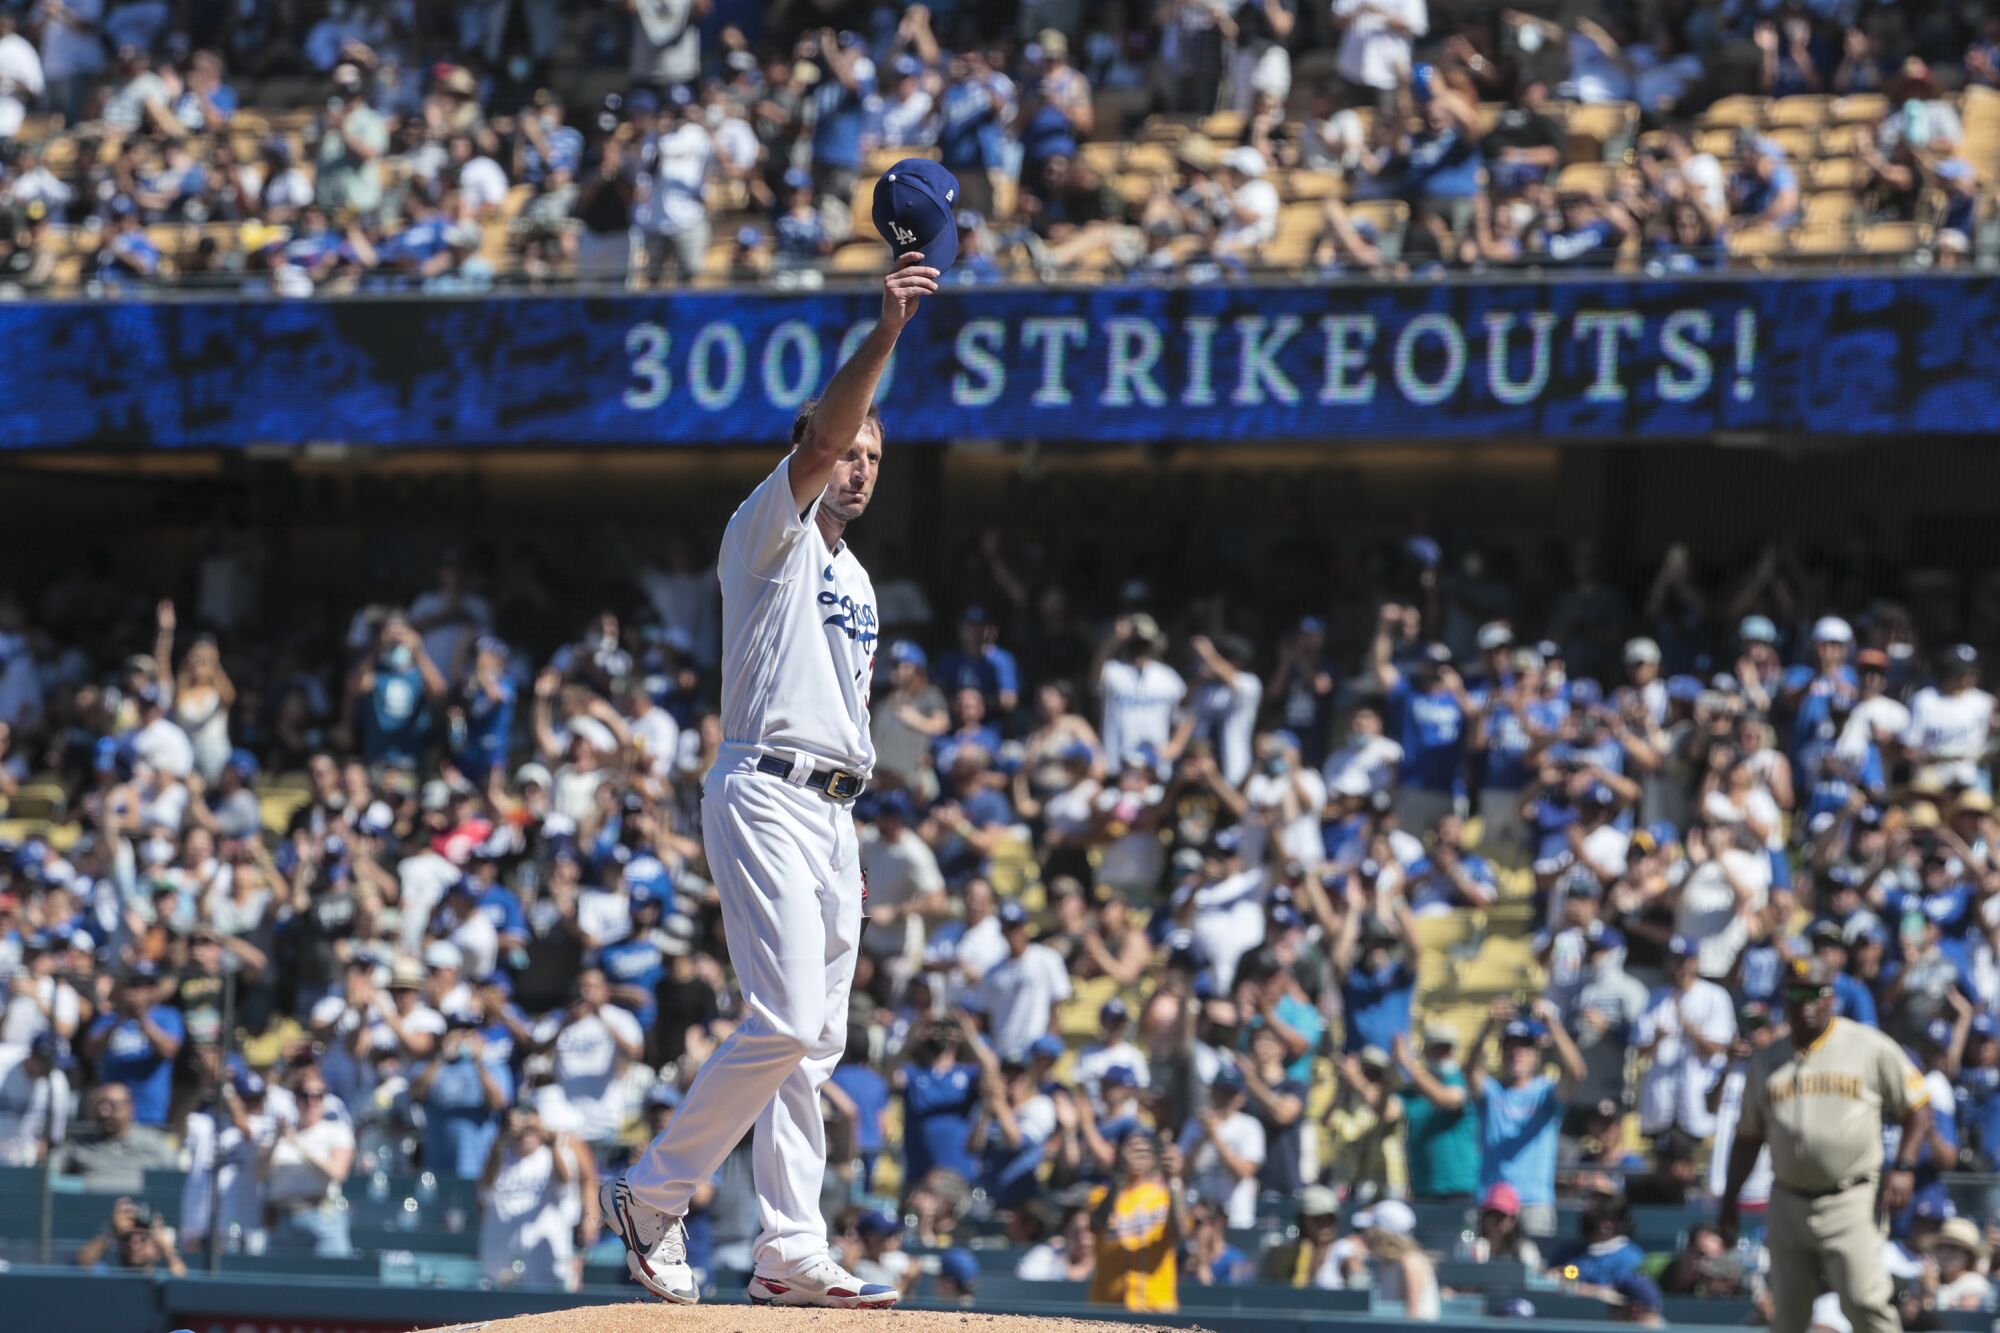 Los Angeles Dodgers starting pitcher Max Scherzer (31) salutes the crowd after his 3,000th career strikeout